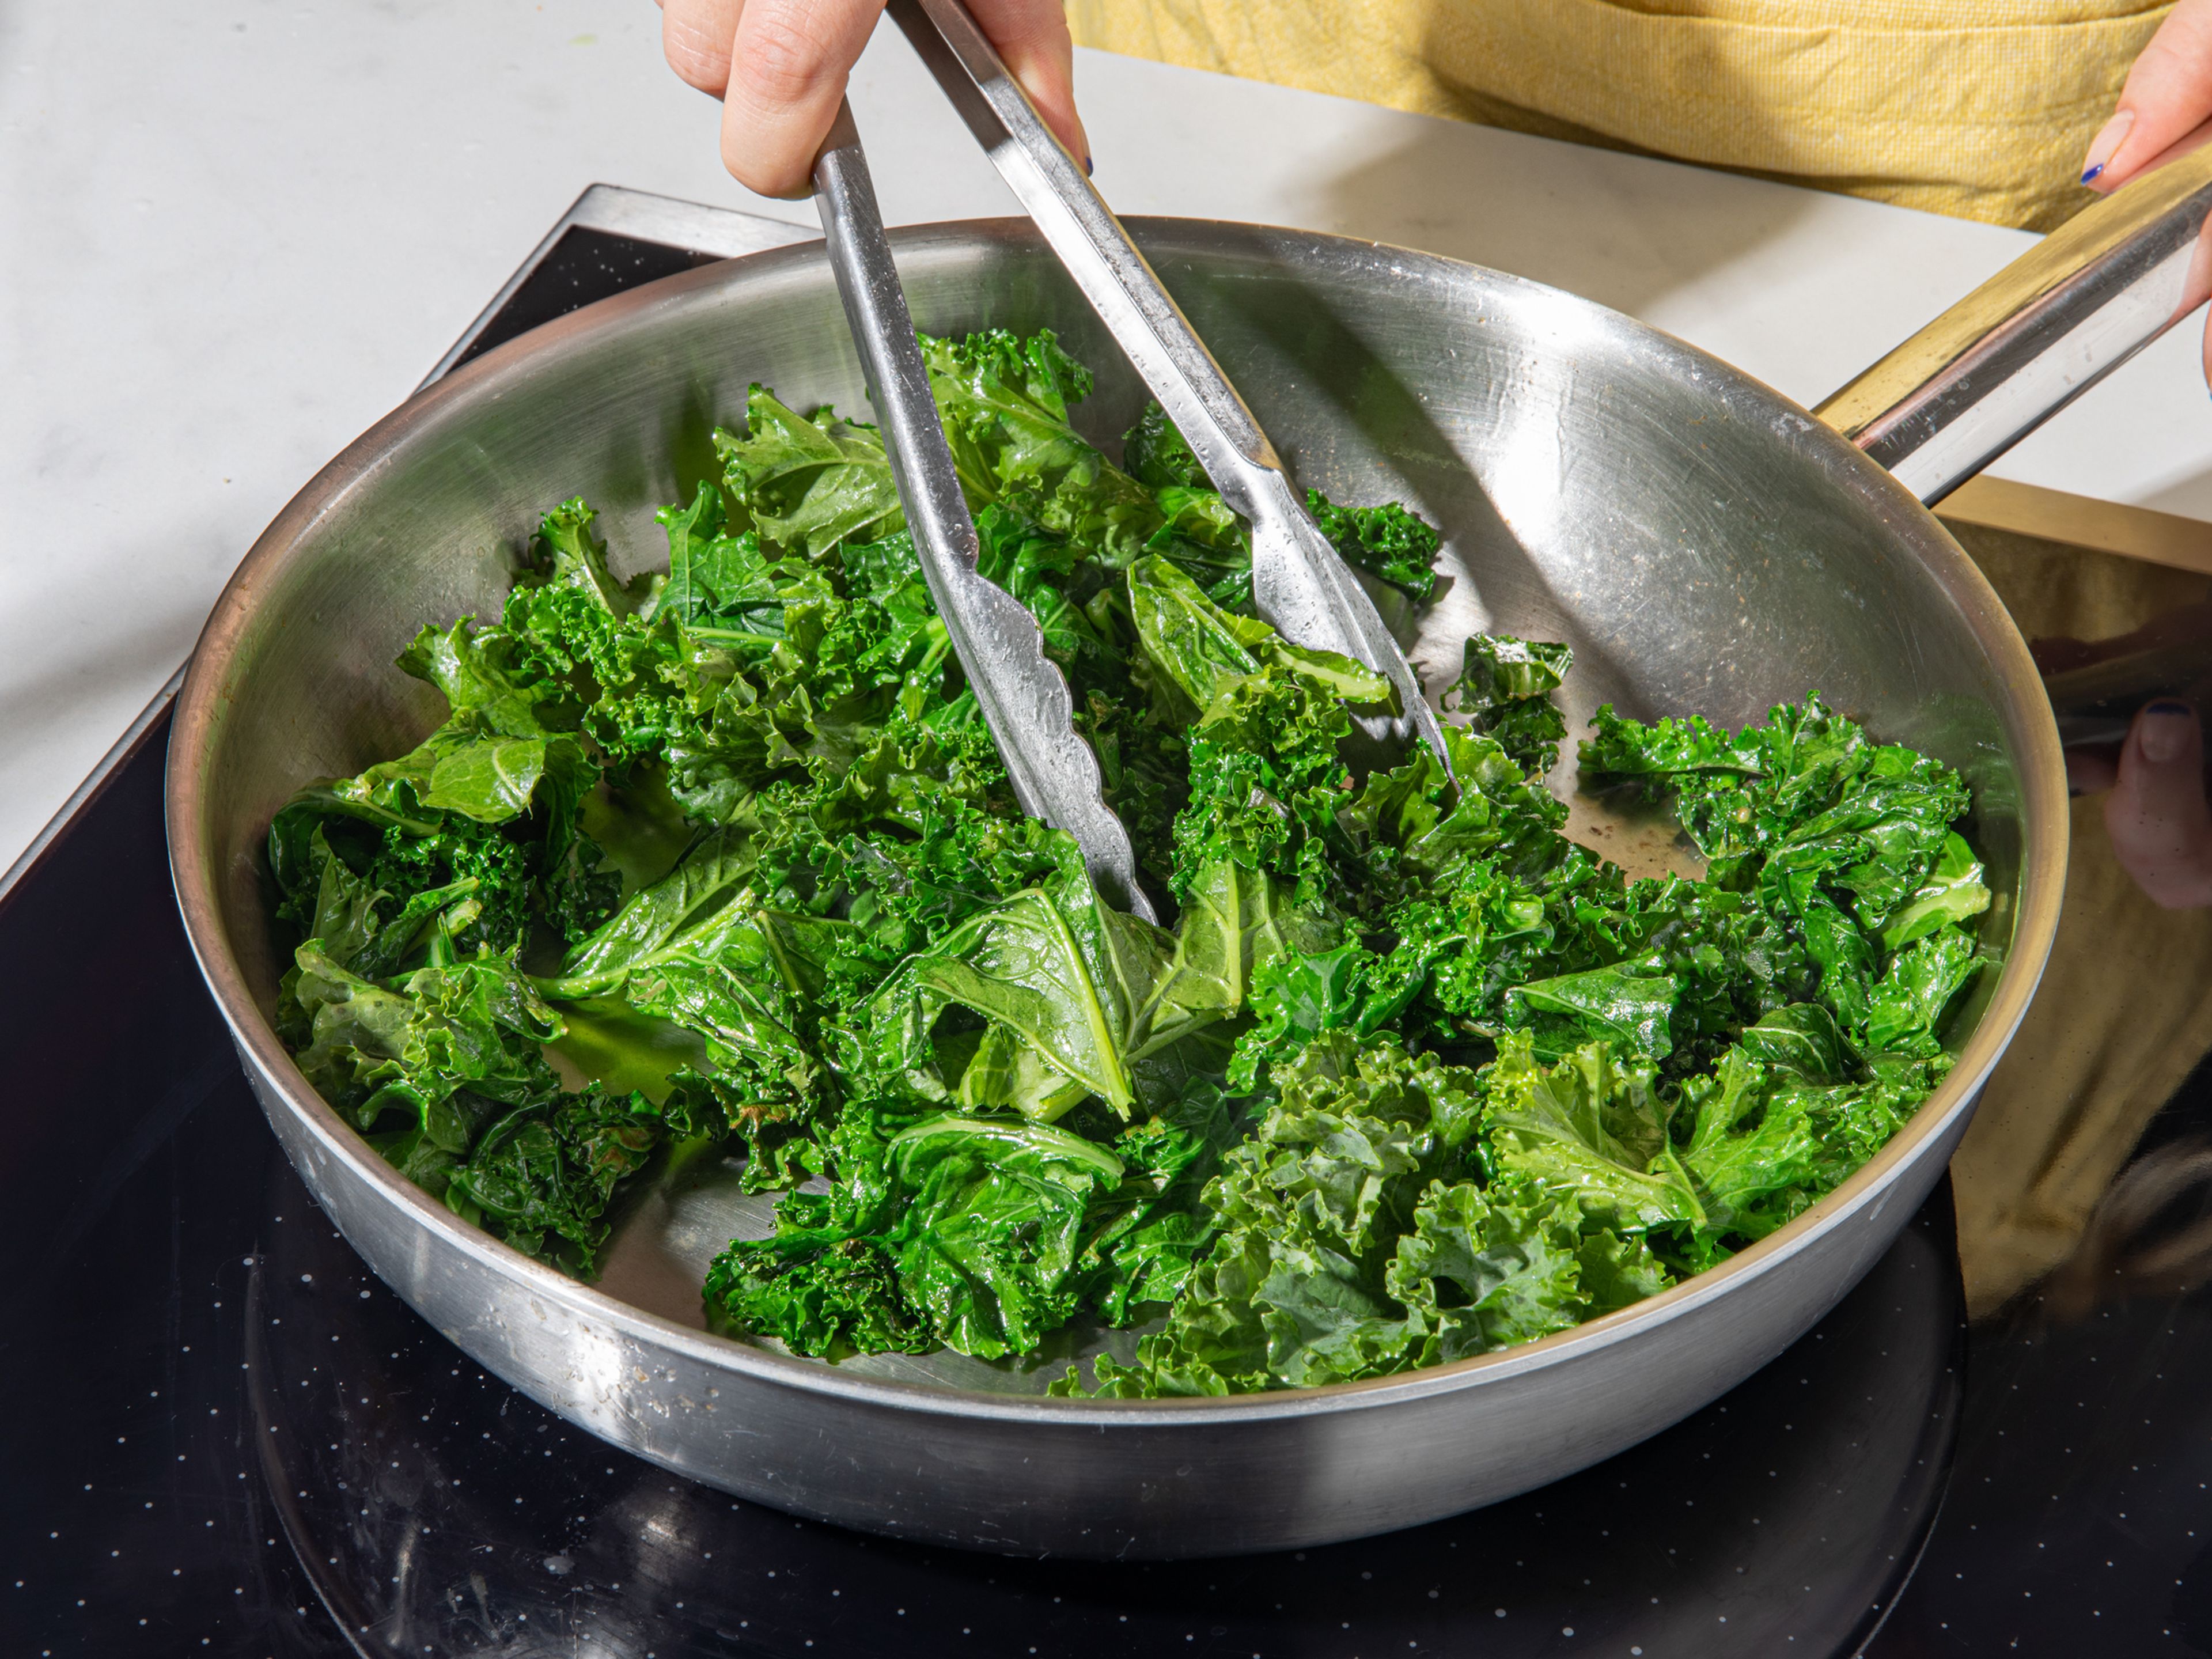 Peel the potatoes and transfer them to a large pot. Cover with cold water, season with generously with salt, and bring to a boil. When cooked through and tender (approx. 30 min.), drain, let cool and slice into approx. 1 cm/⅓-inch thick slices. Wash kale and remove the stalk. Sauté kale in a large pan with a little olive oil until tender. Season with salt and nutmeg and set aside. Peel and mince shallots and garlic. In the same pan set over medium-high heat, sauté the peas in a little butter for approx. 2 – 3 min. Season with salt, pepper, lemon juice, and lemon zest. Mash coarsely in the pan using a fork and set aside. Slice cooked beets and season with salt.